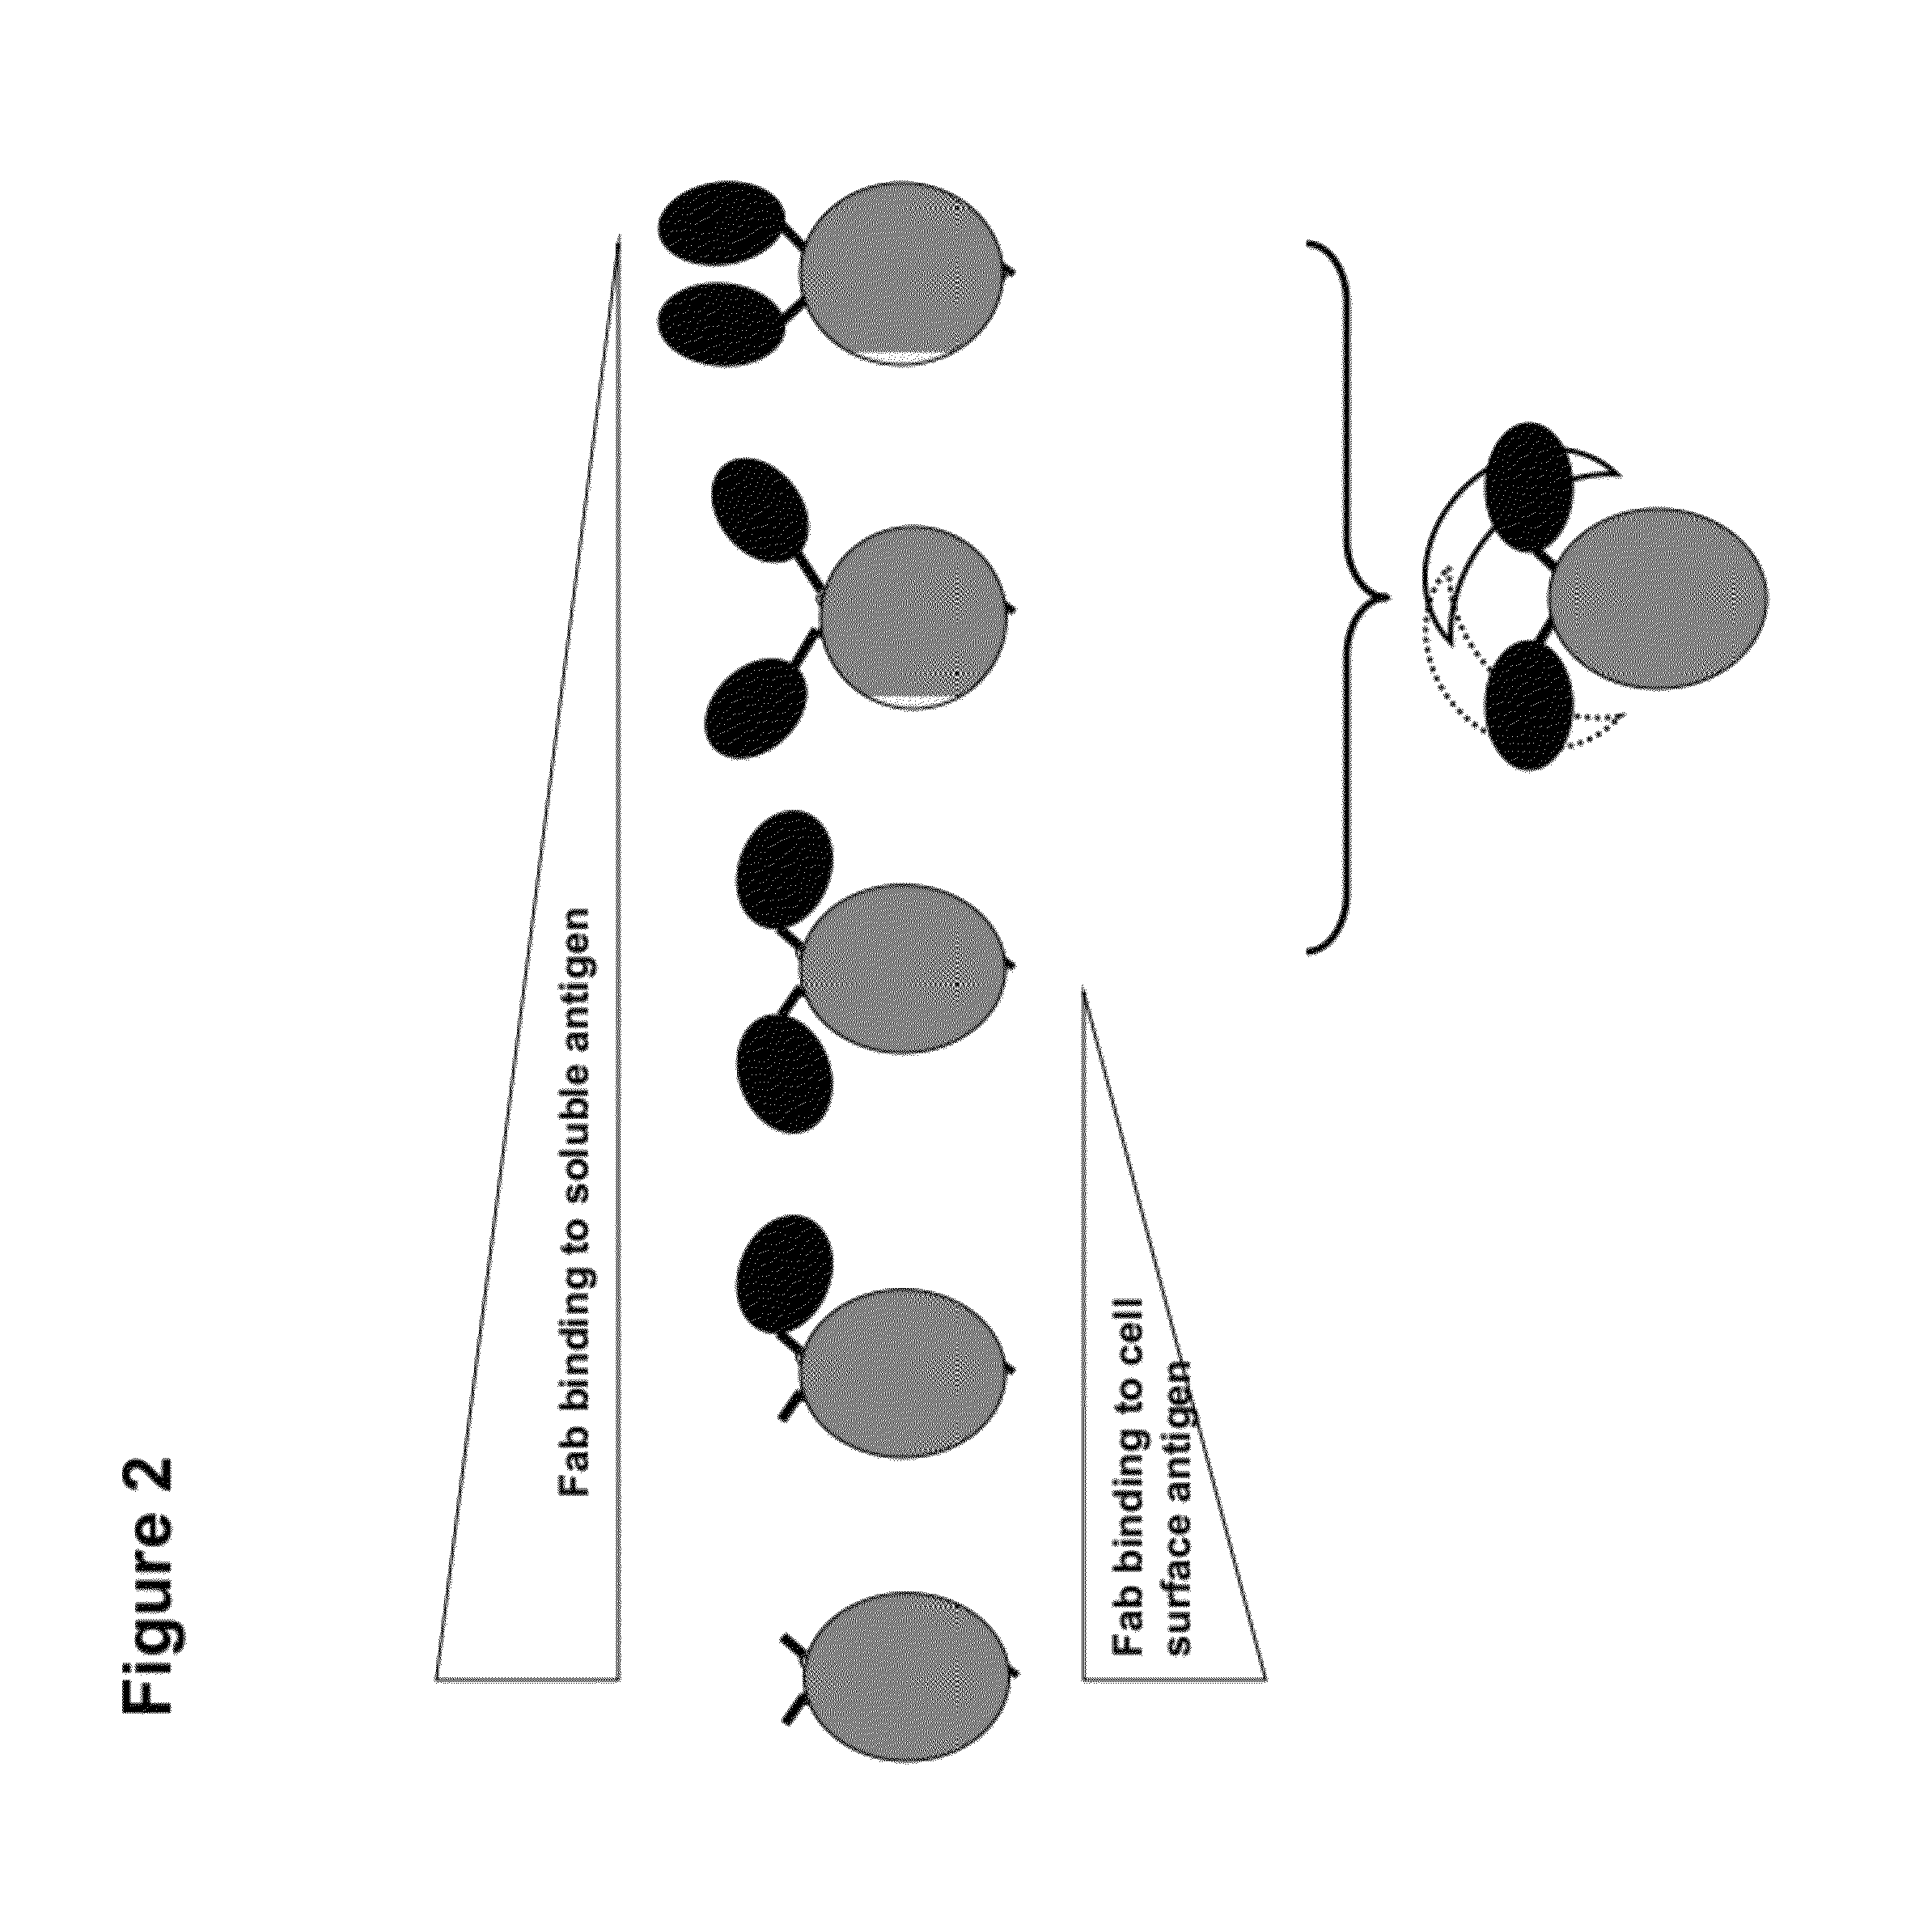 Multi-specific FAB fusion proteins and methods of use